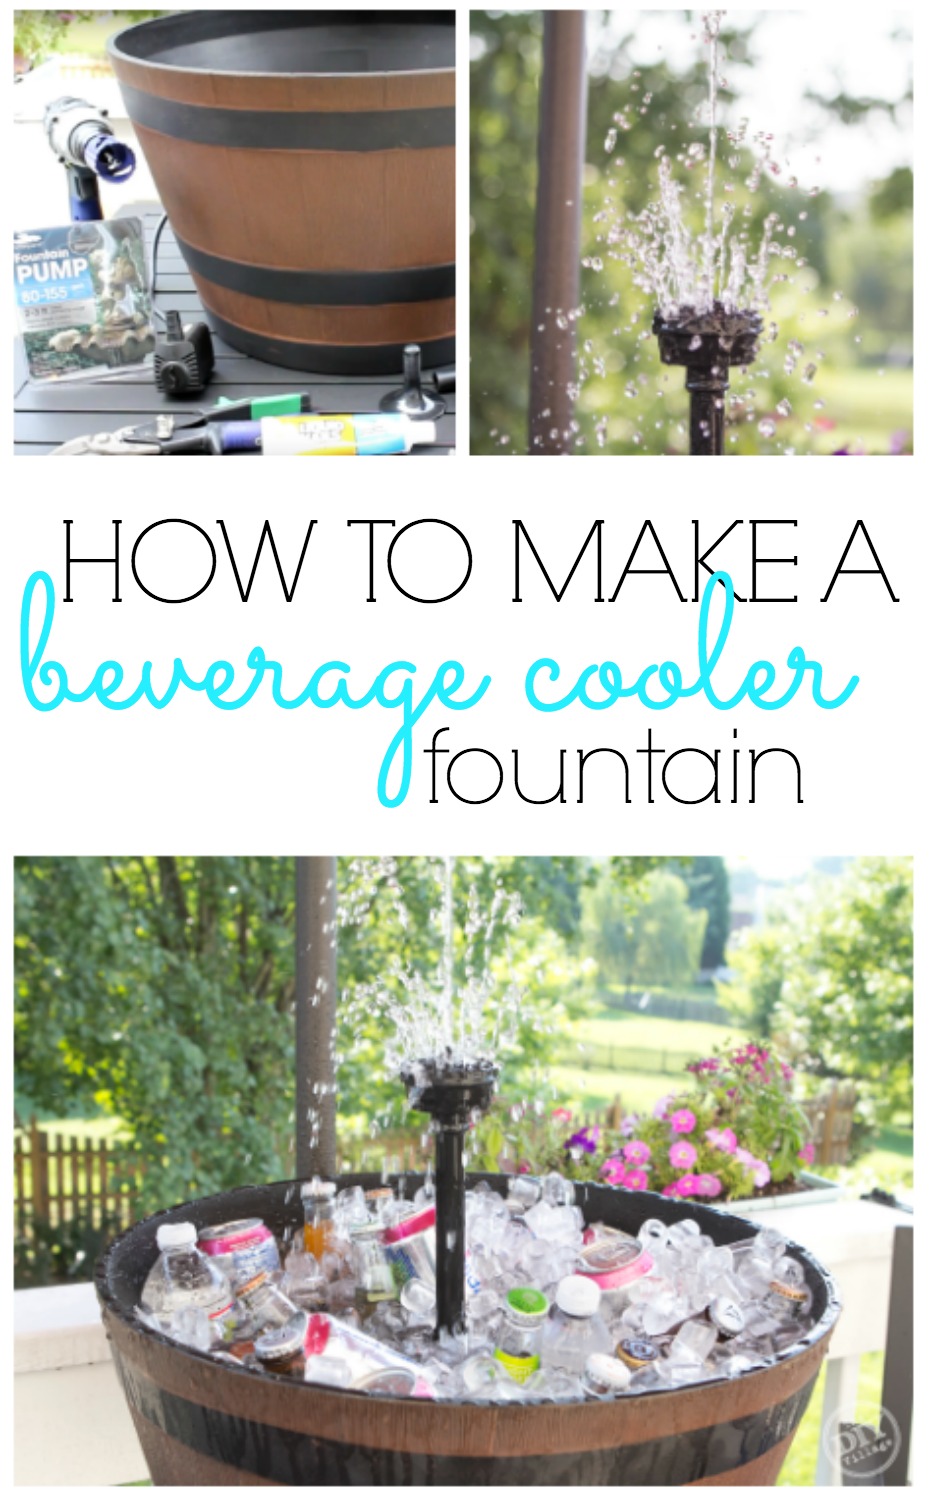 Awesome Iced beverage cooler fountain. This is so cool. I need one of these for our next cookout or summer party! Great way to keep guests drinks cool.